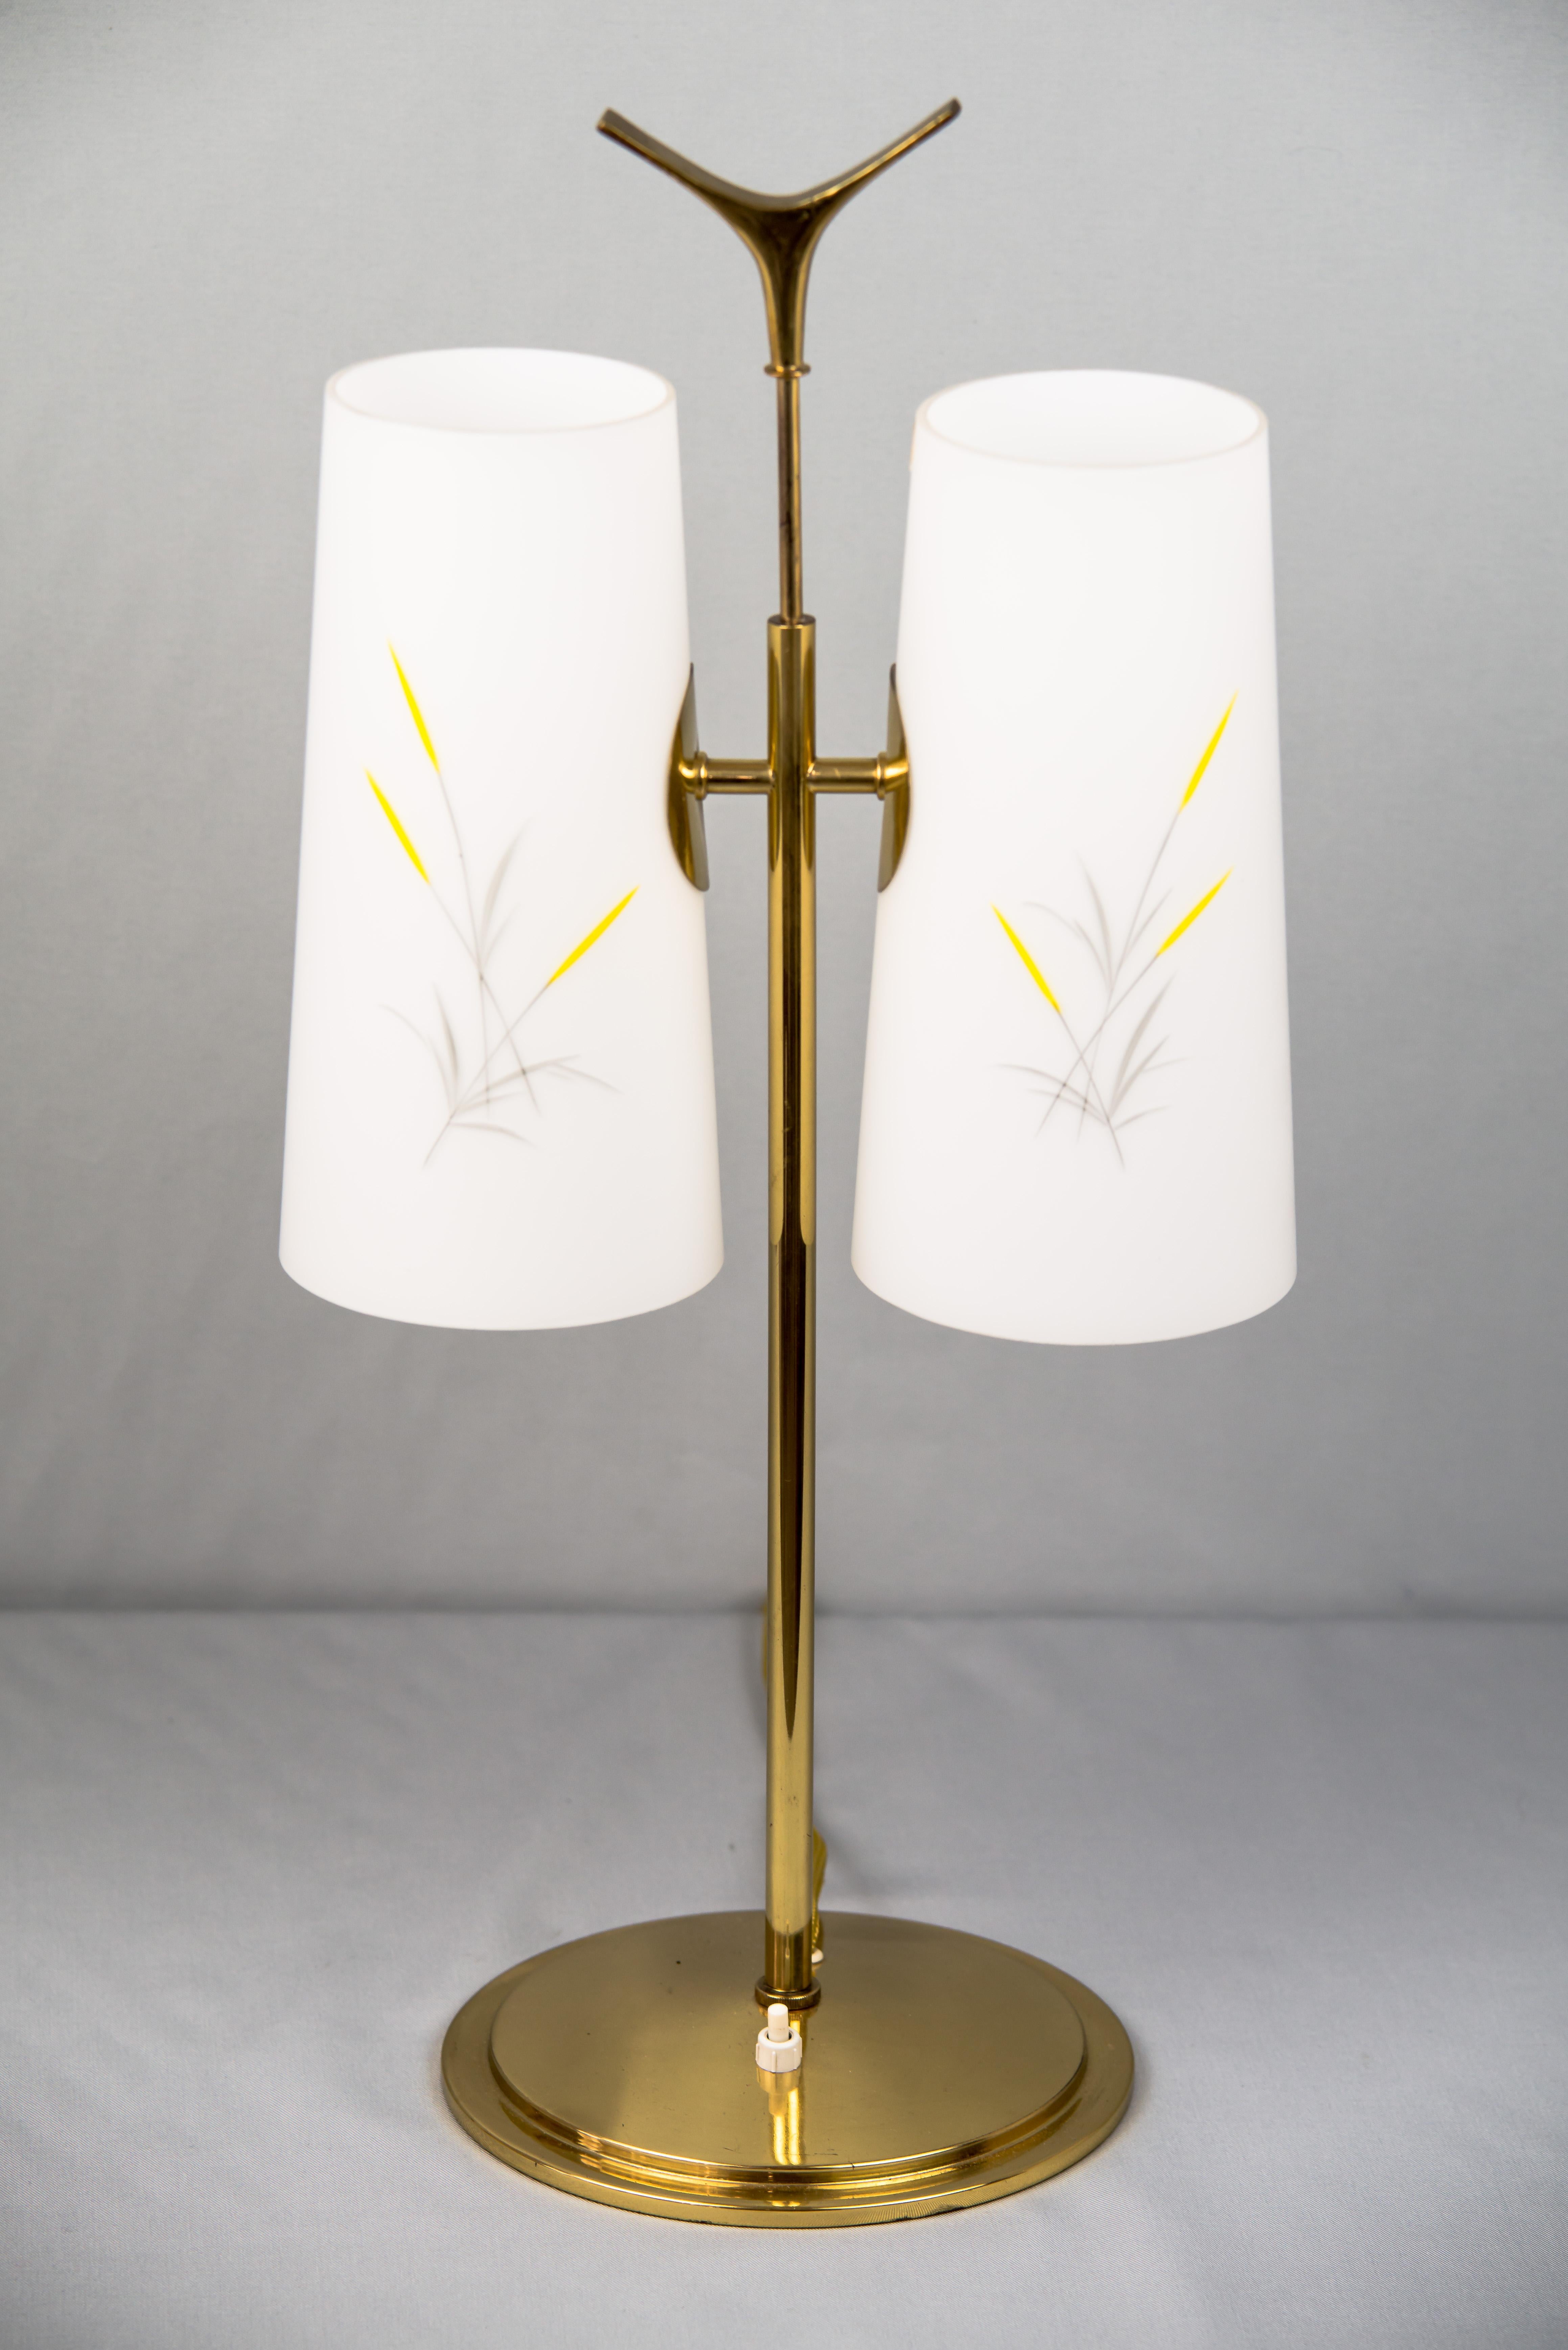 Table lamp by Rupert Nikoll, 1960s (marked)
Original condition
Hand painted glass shades.